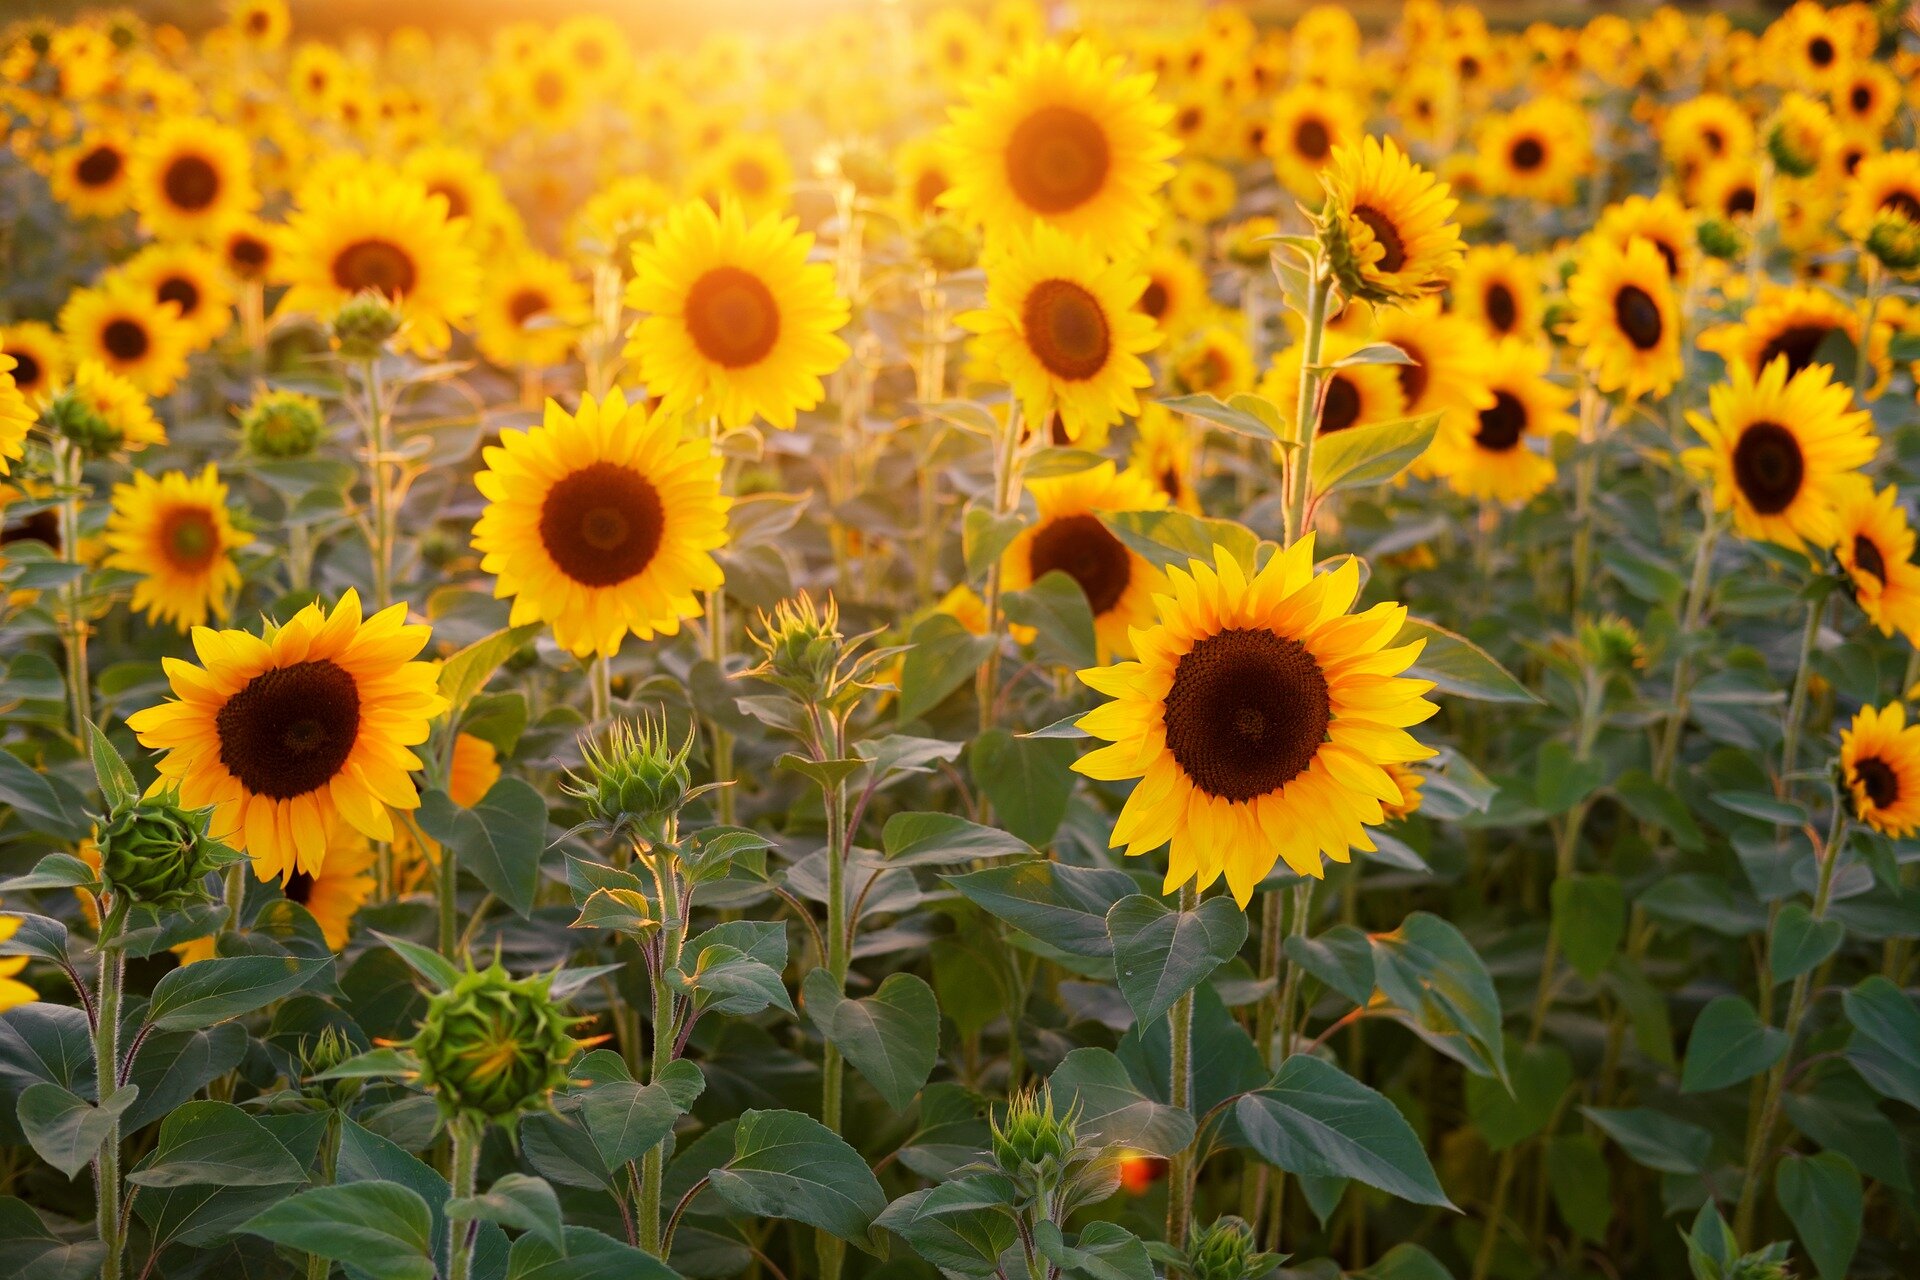 Sunflowers' invisible colors help them attract bees and adapt to drought